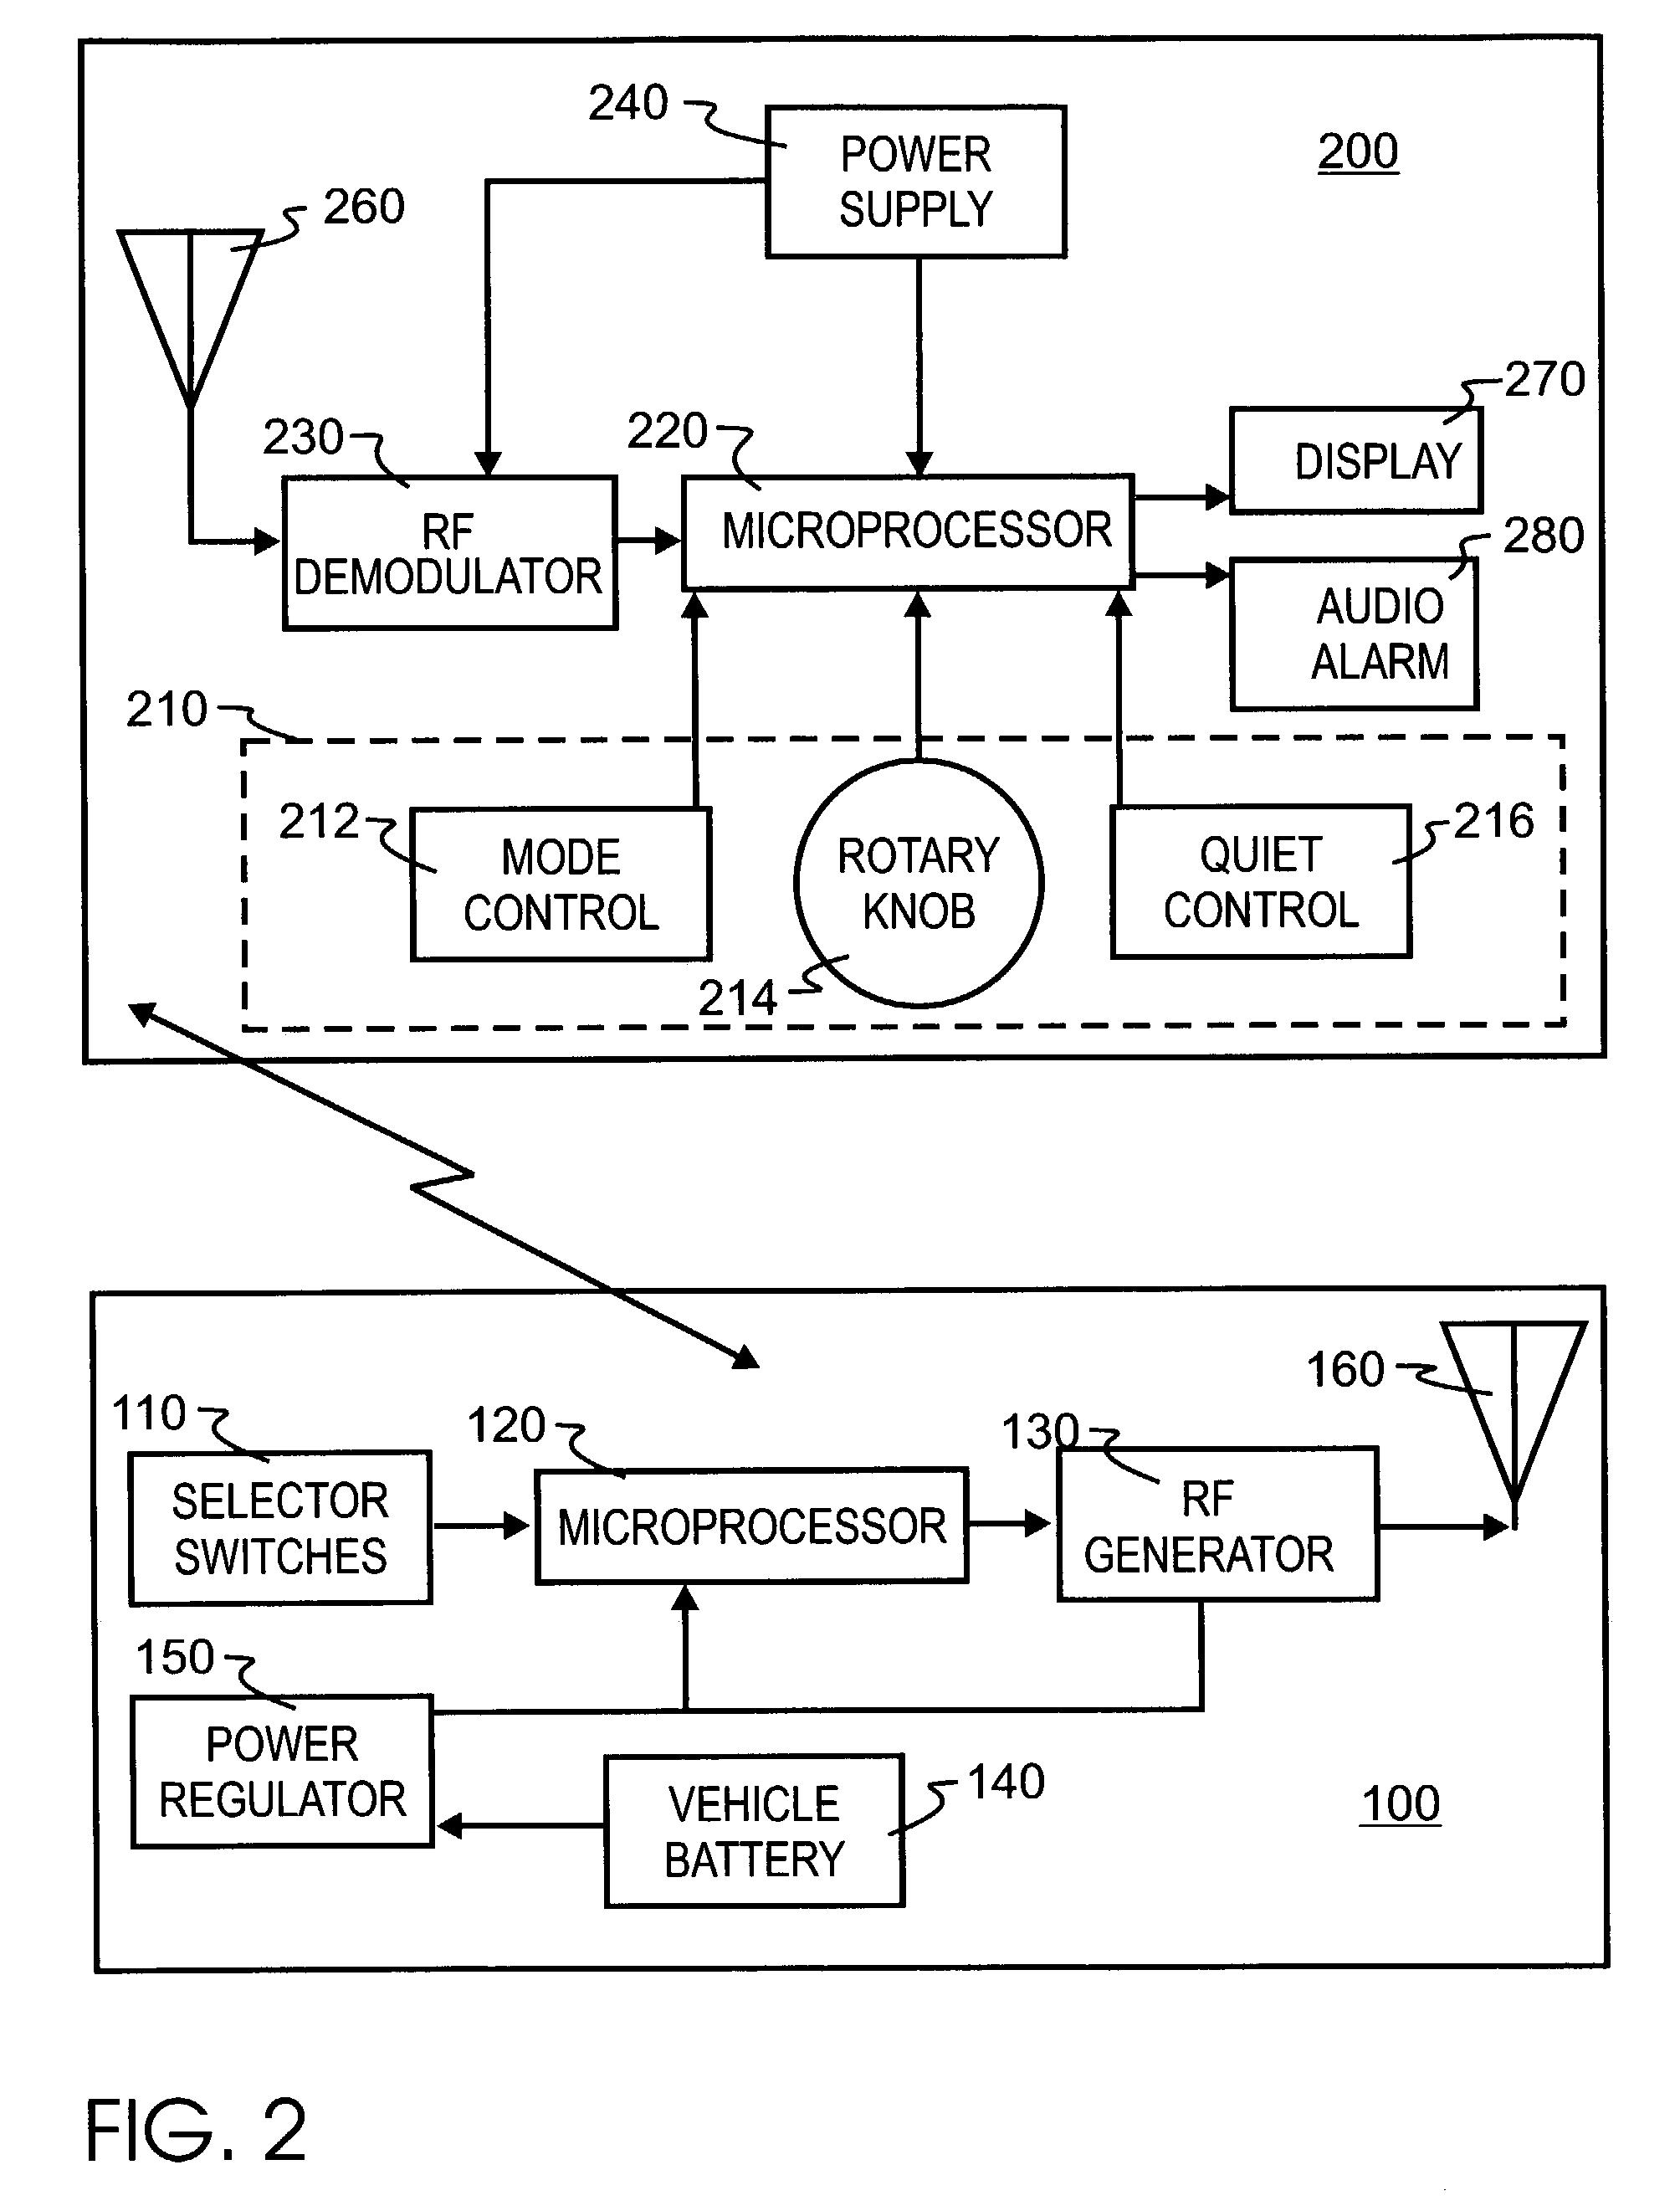 Transportation monitoring system for detecting the approach of a specific vehicle